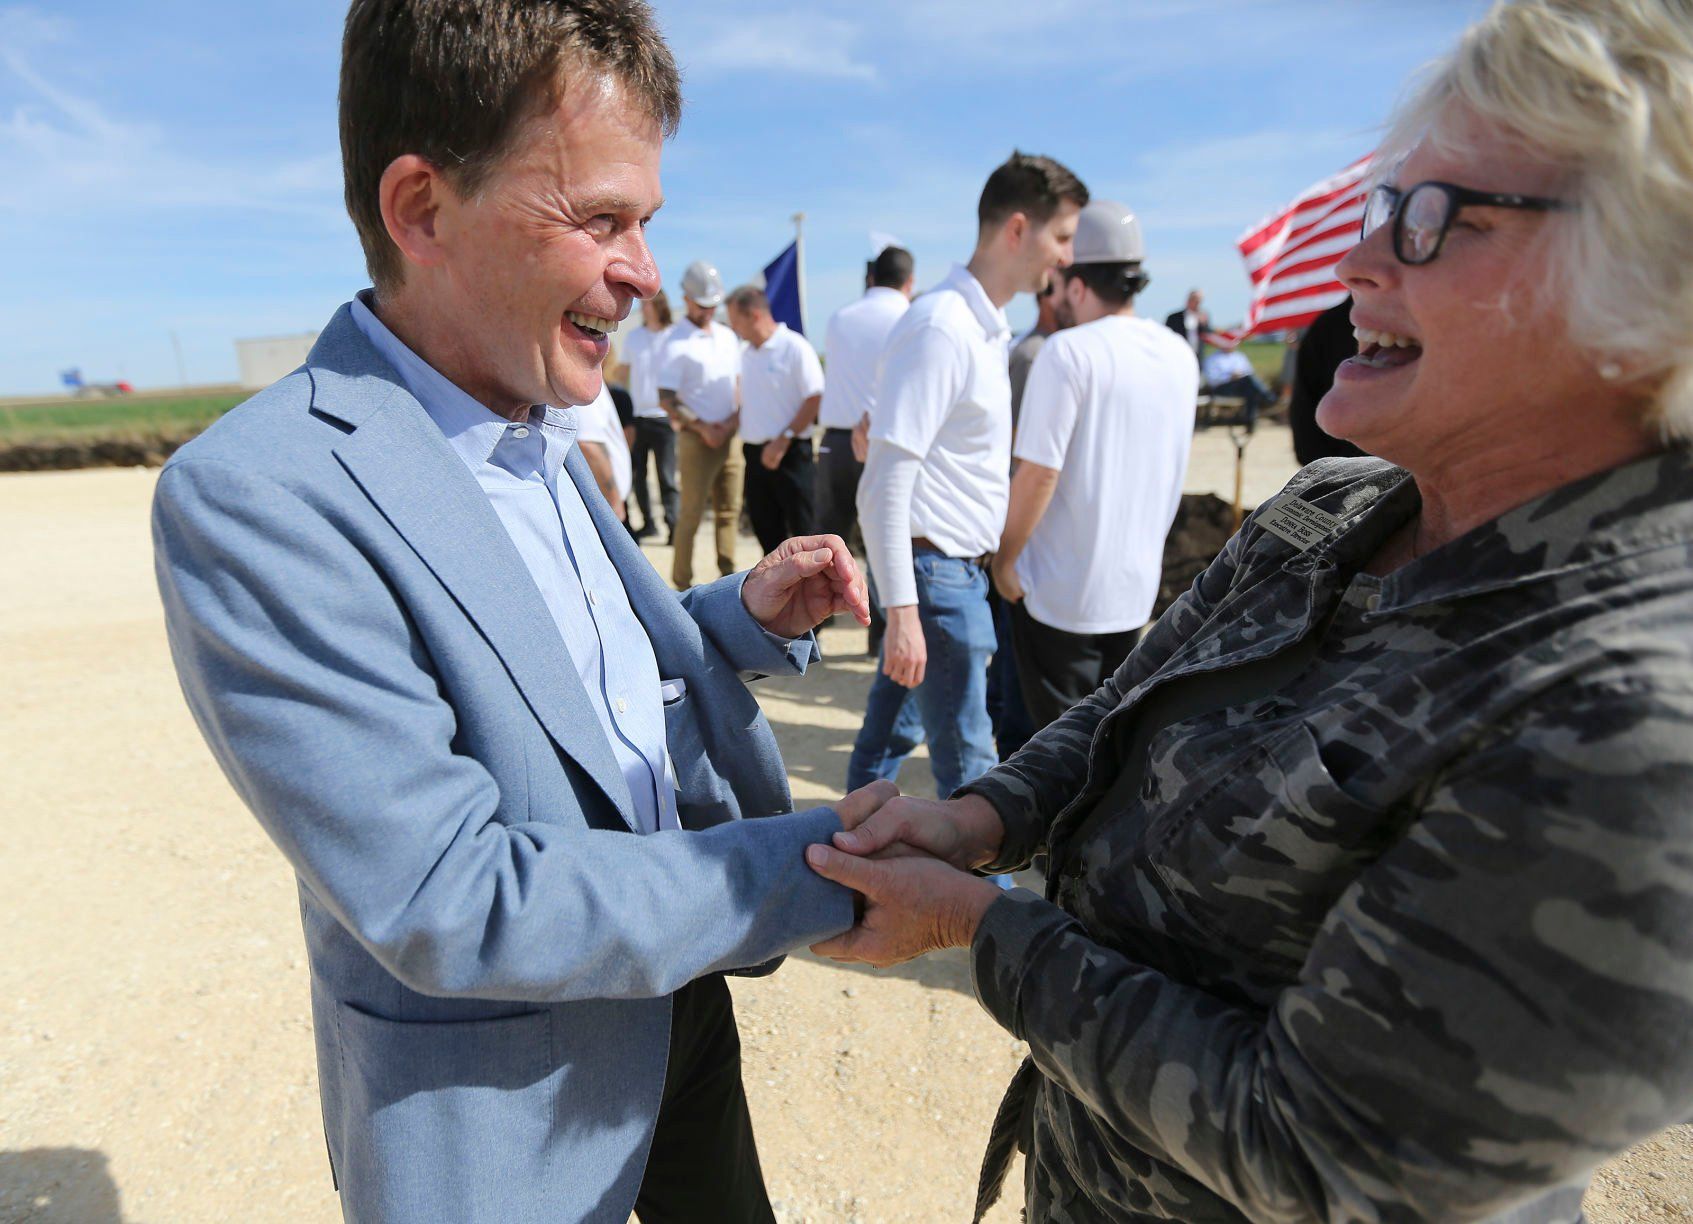 Wolfgang Buehler, co-owner of Ancient Brands Milling, chats with Delaware County Economic Development Executive Director Donna Boss after a groundbreaking event on Tuesday, Oct. 4, 2022. The manufacturer, which makes organic and non-GMO puffed grains, has planned a $26.5 million, 92,000-square-foot project in Dyersville’s 20 West Industrial Park.    PHOTO CREDIT: Dave Kettering